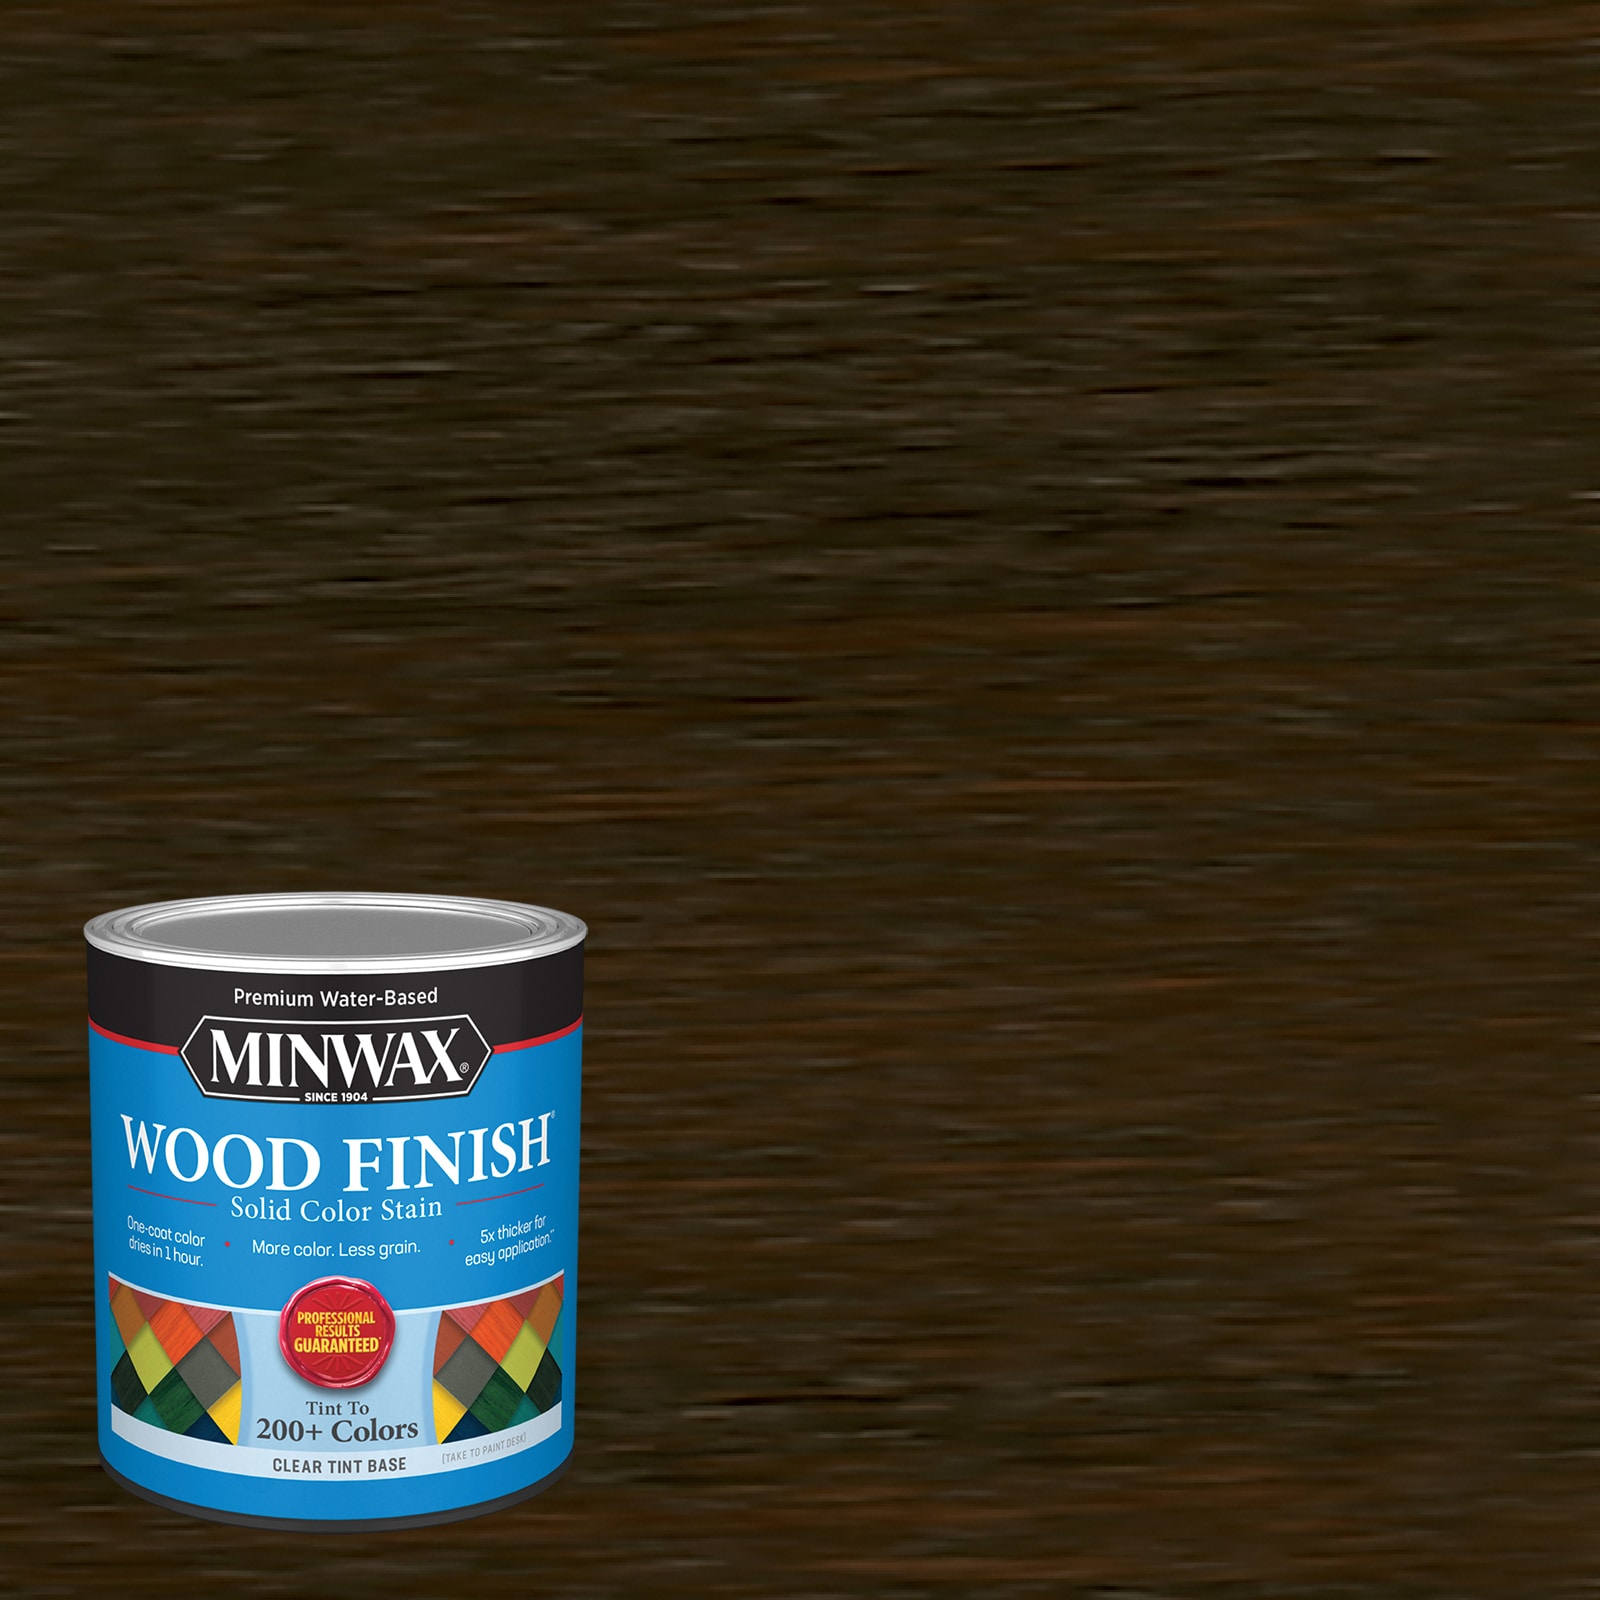 Minwax Wood Finish Water-Based Mocha Interior Mw1116 Stain Stains (1-Quart) Interior in Solid Sumatra department at the